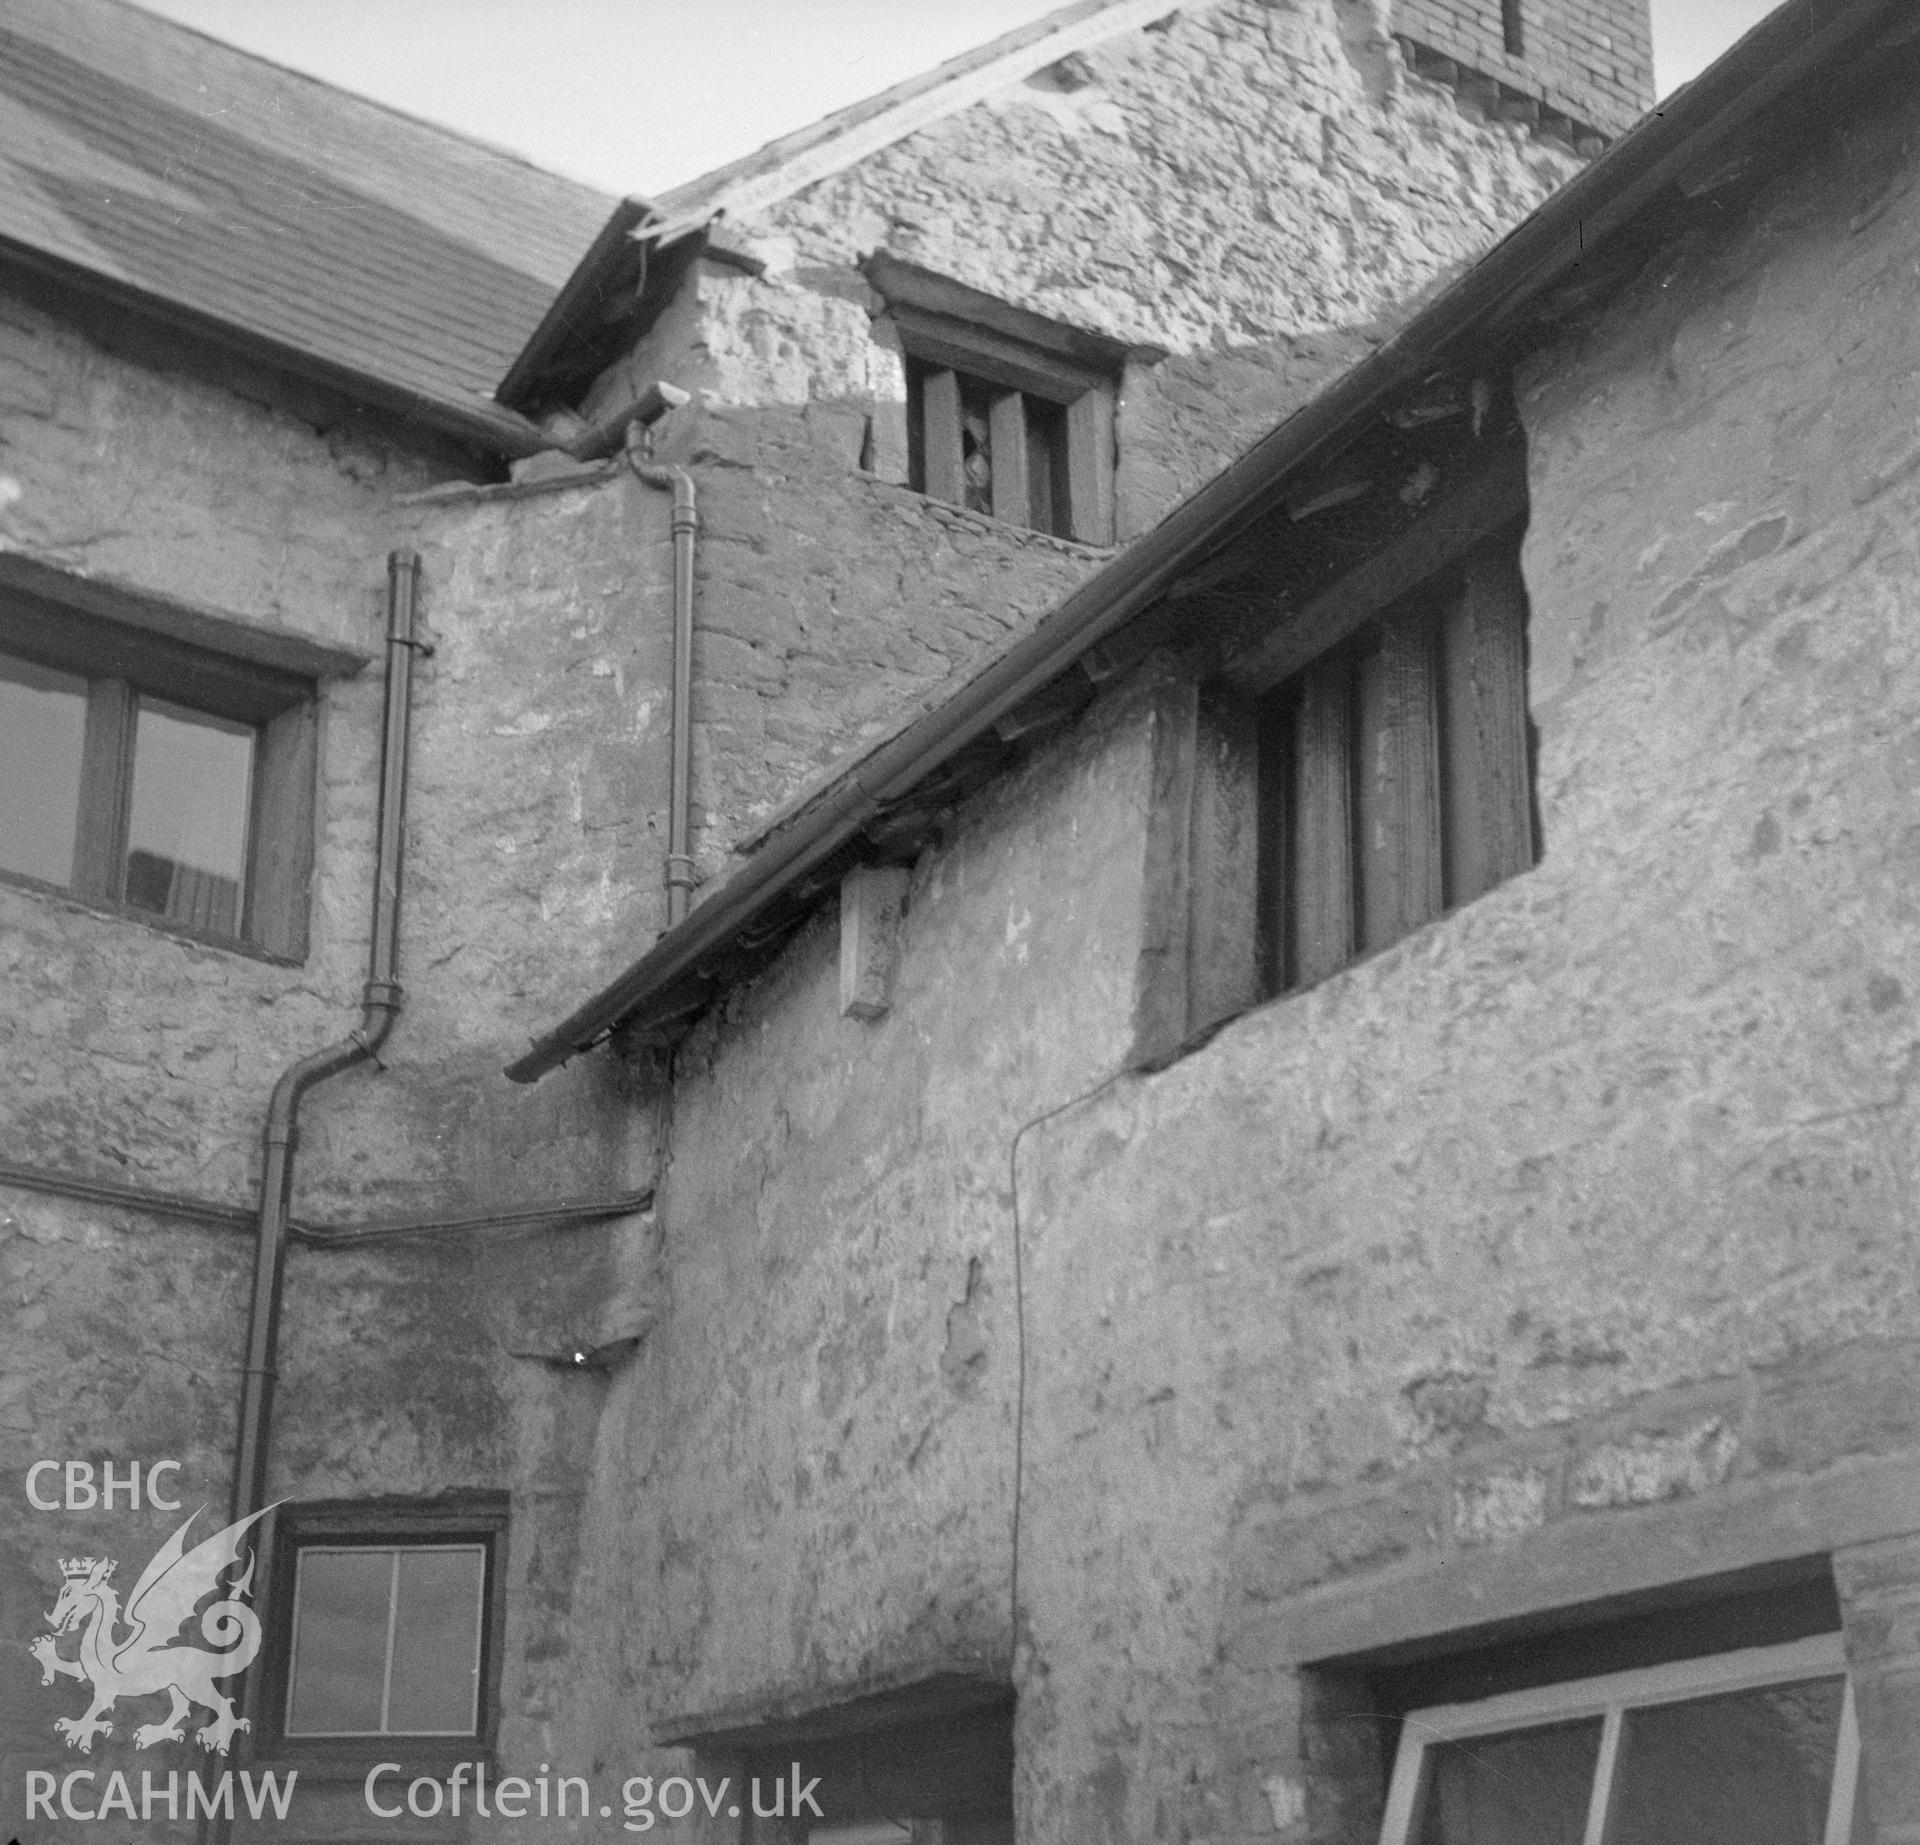 Digital copy of a nitrate negative showing view of an unnamed house in or near Clytha.